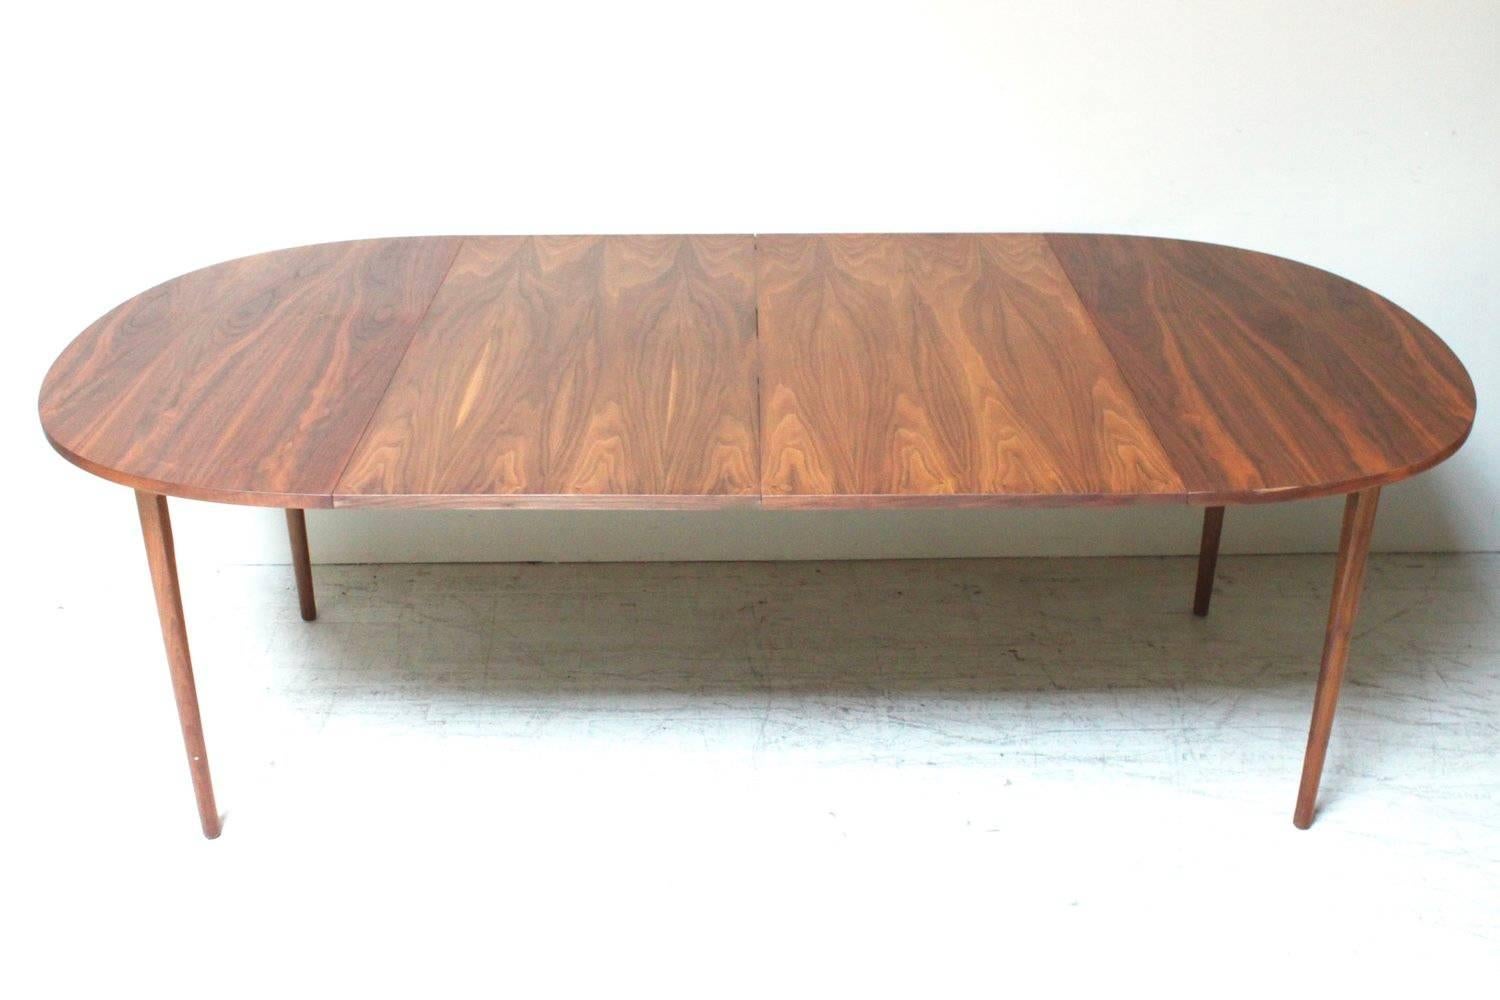 This is a stunning warm walnut circular dining table with two 22